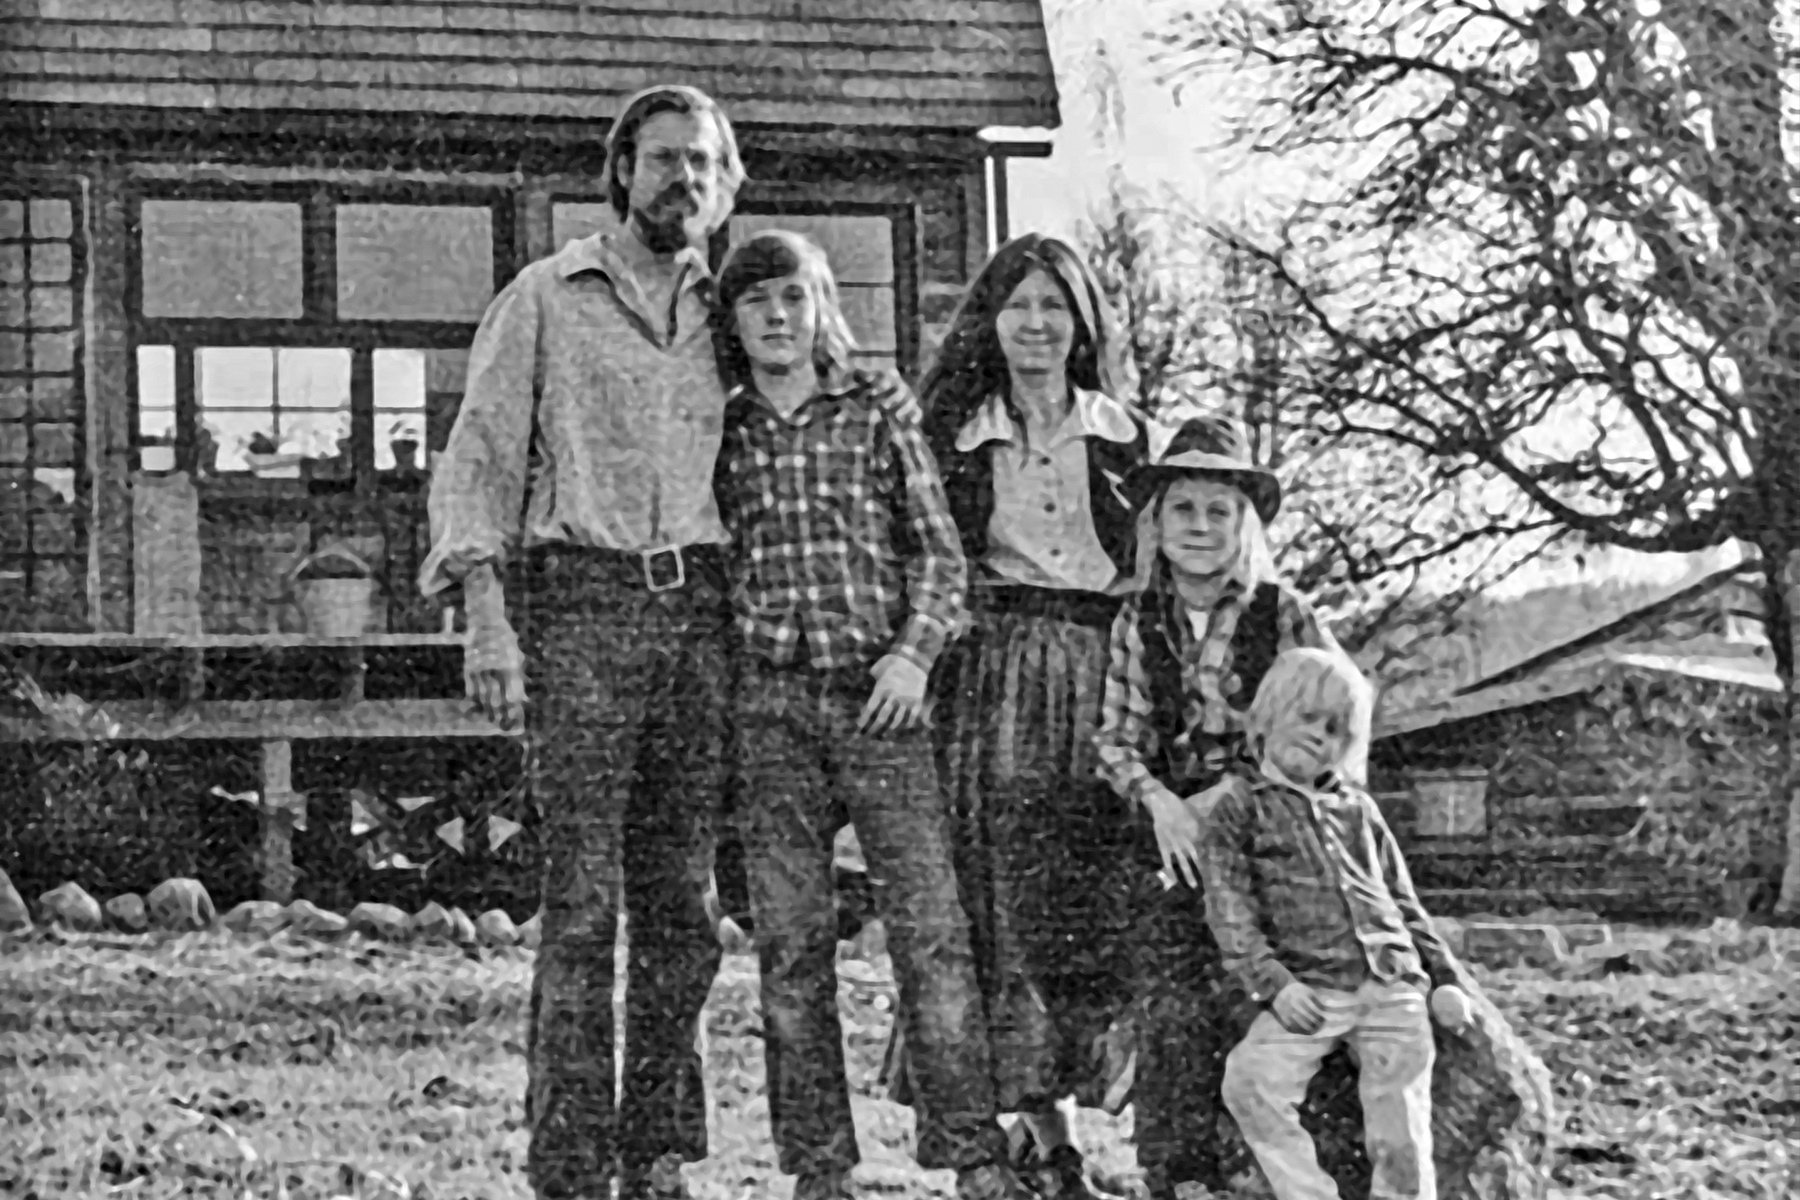 Pillsbury and his family in front of their California home.